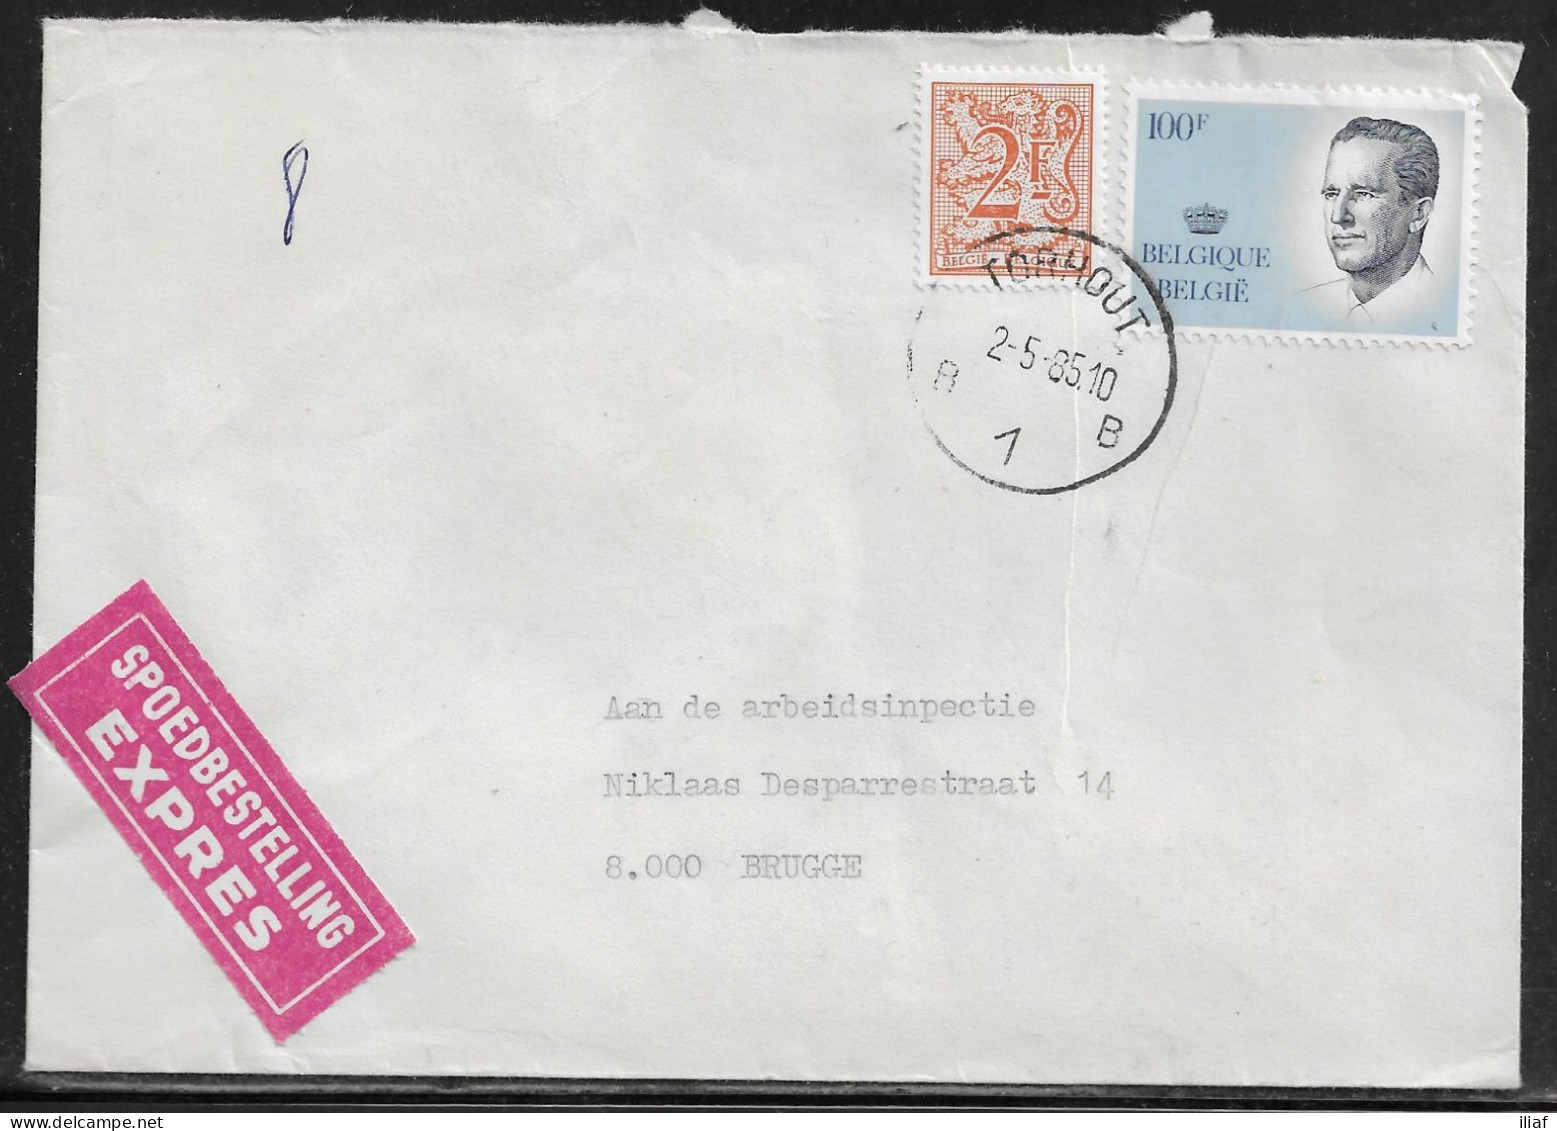 Belgium. Stamps Mi. 2189, Mi. 1950 On Express Letter Sent From Torhout On 2.05.1985 For Brugge - Cartas & Documentos